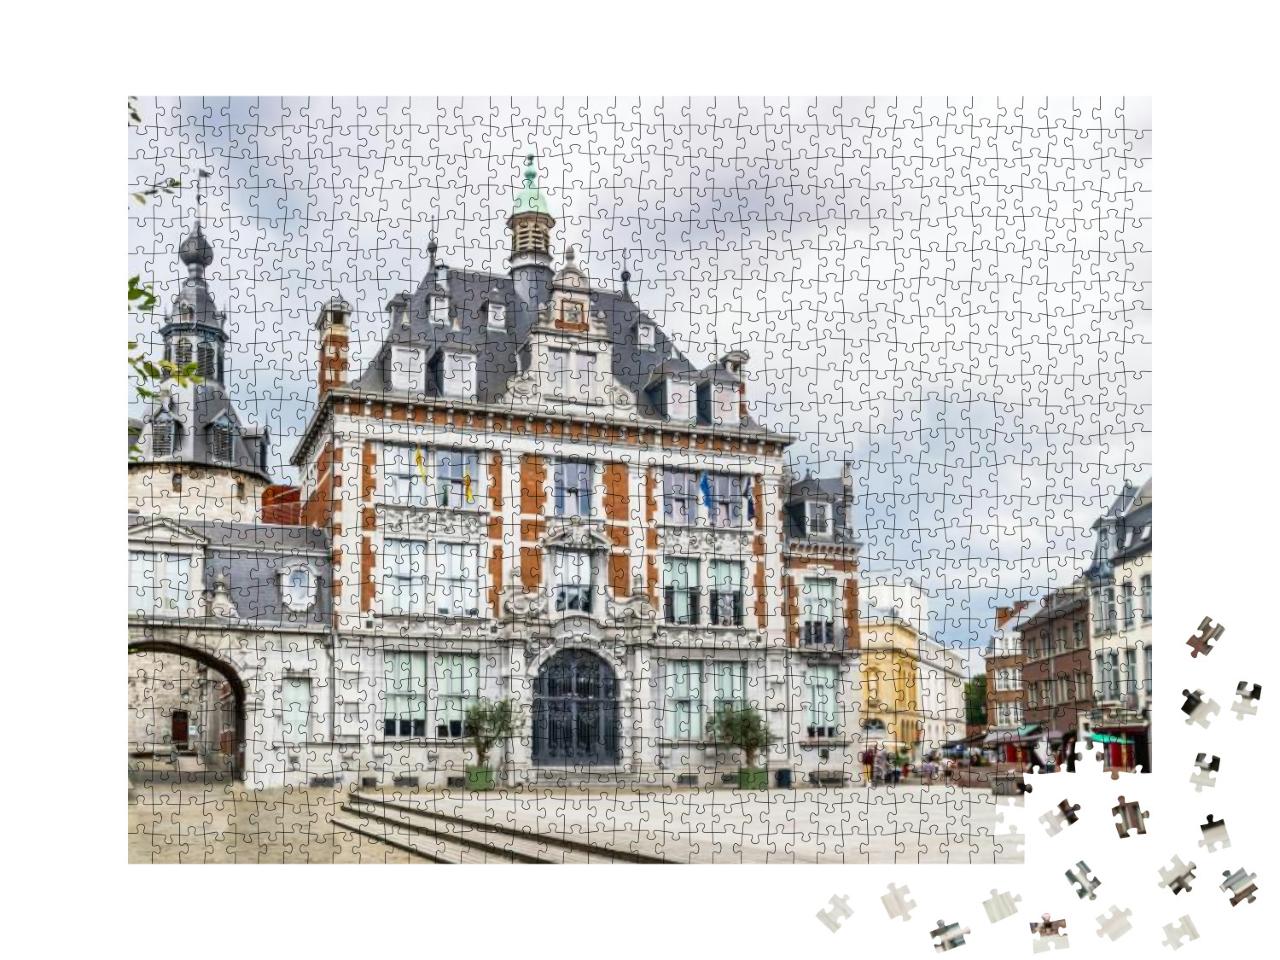 View on Congress Building in Namur - Belgium... Jigsaw Puzzle with 1000 pieces